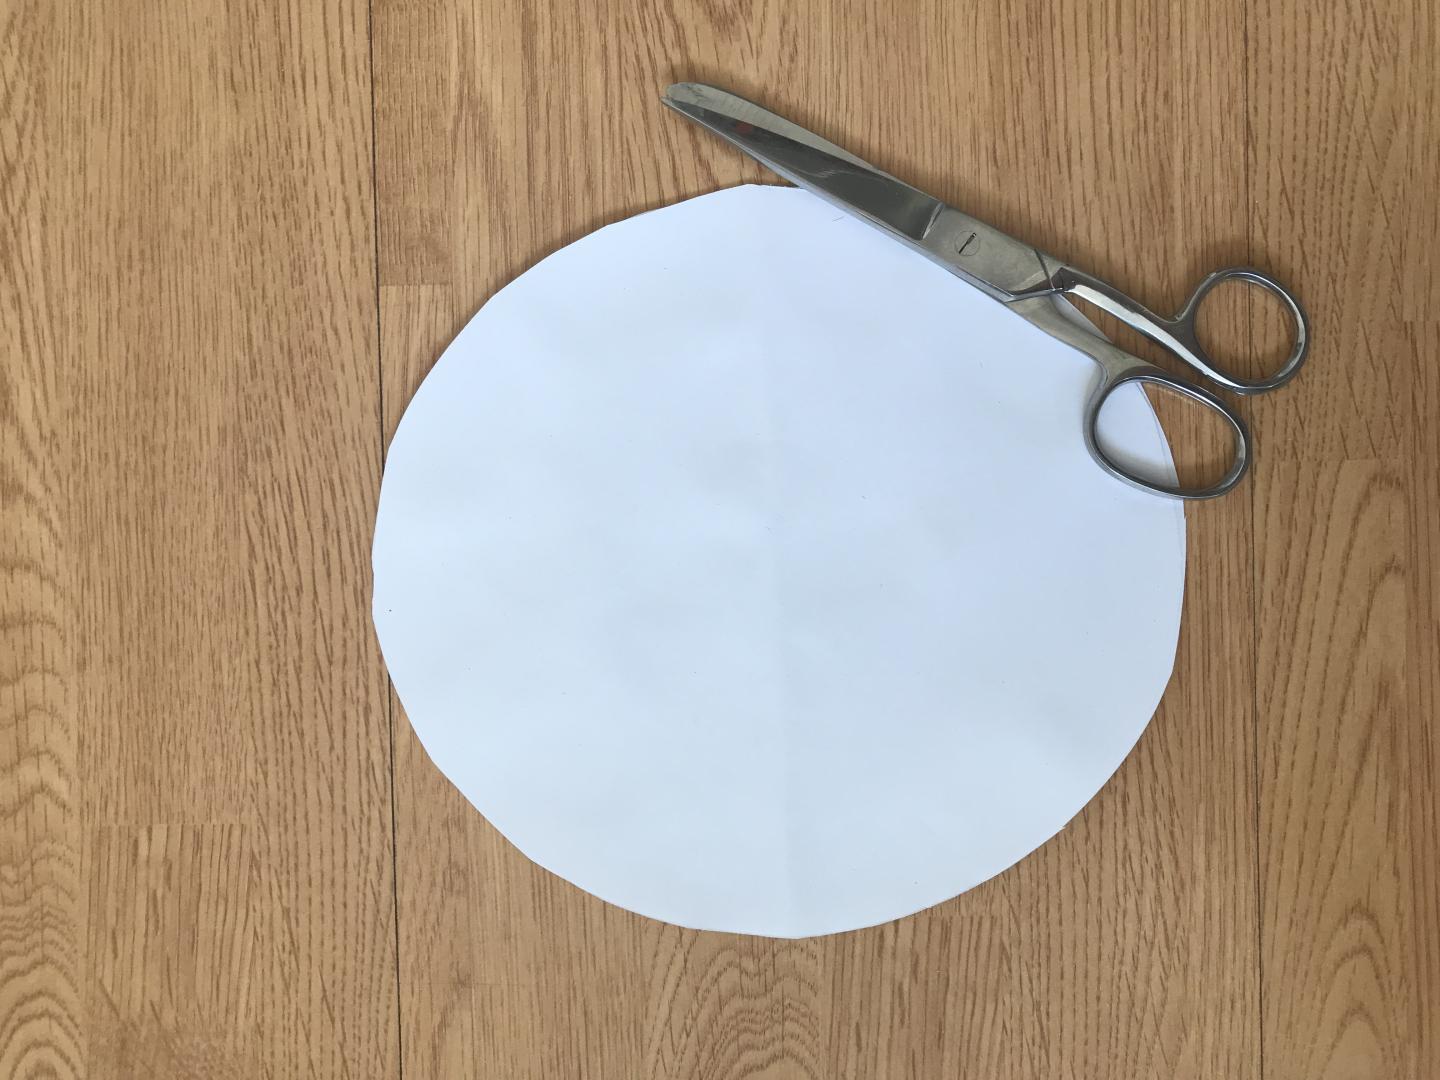 A circle cut from card with a pair of scissors nearby.